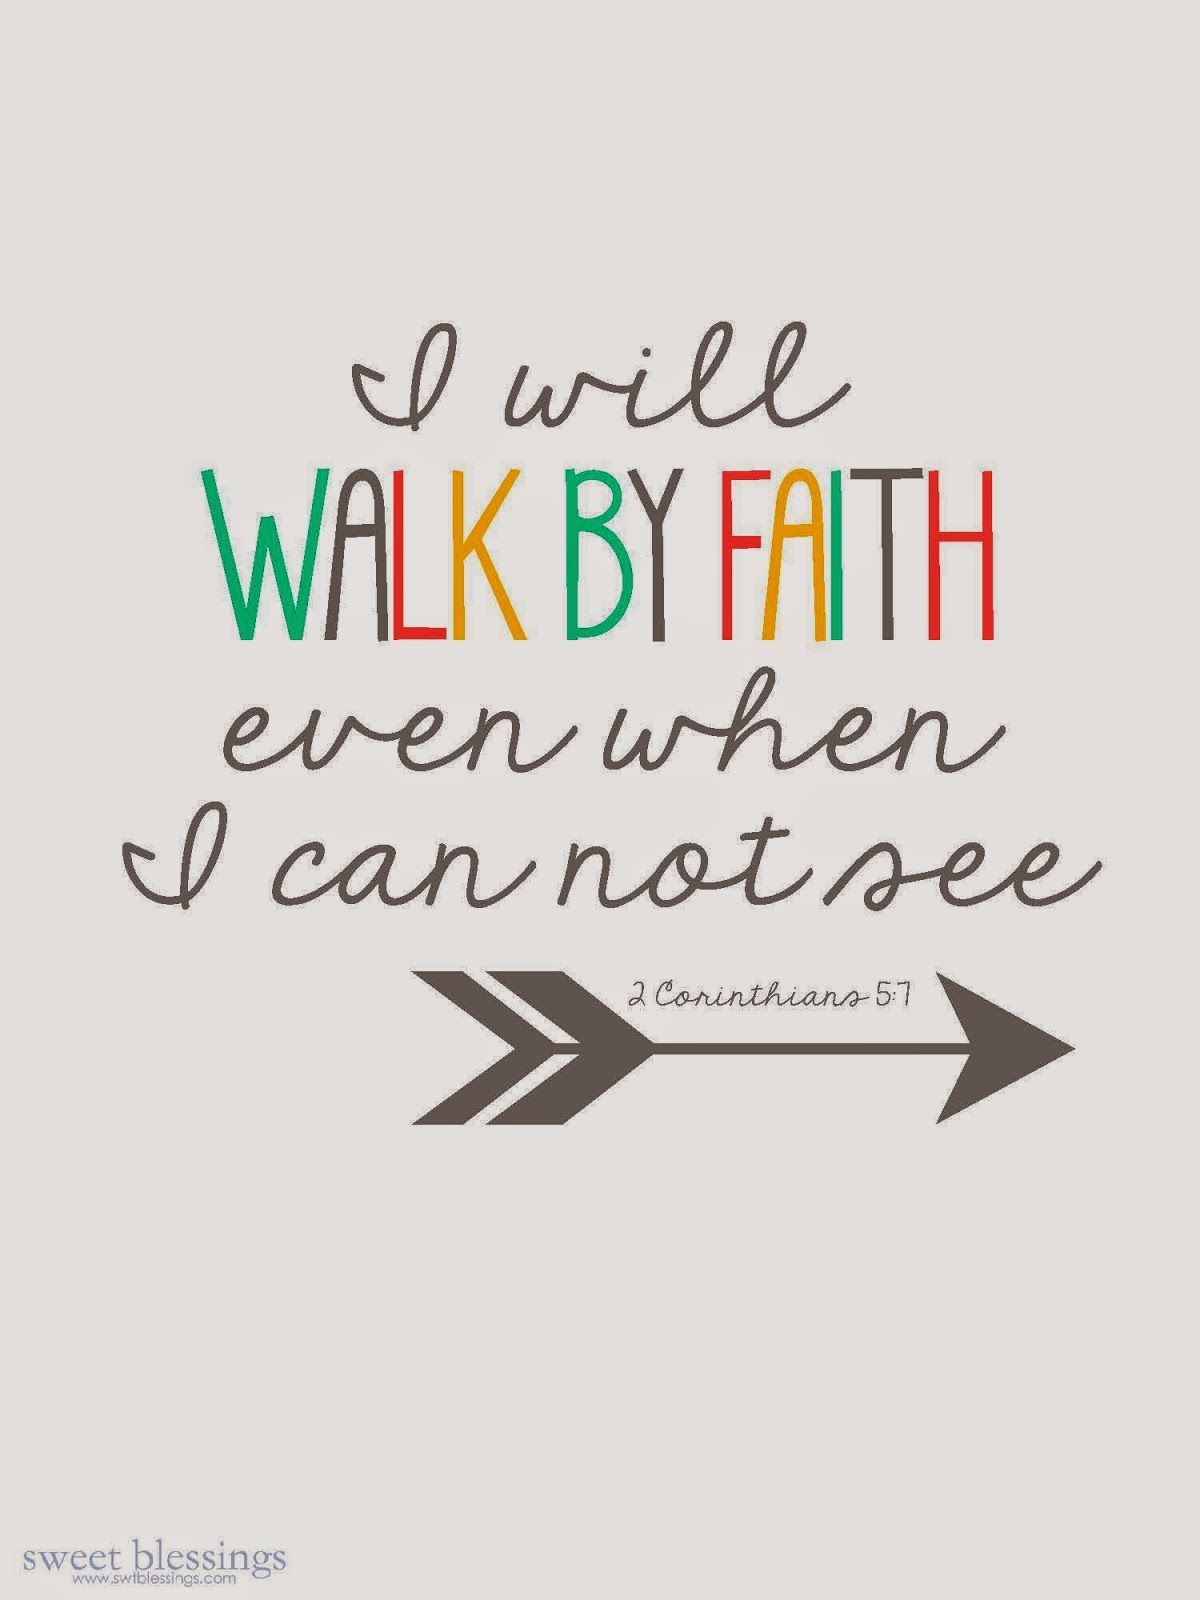 Yes Lord, I will! Even when its hard and I cant see up, down or sideways, I will continue to walk by faith and trust in Your